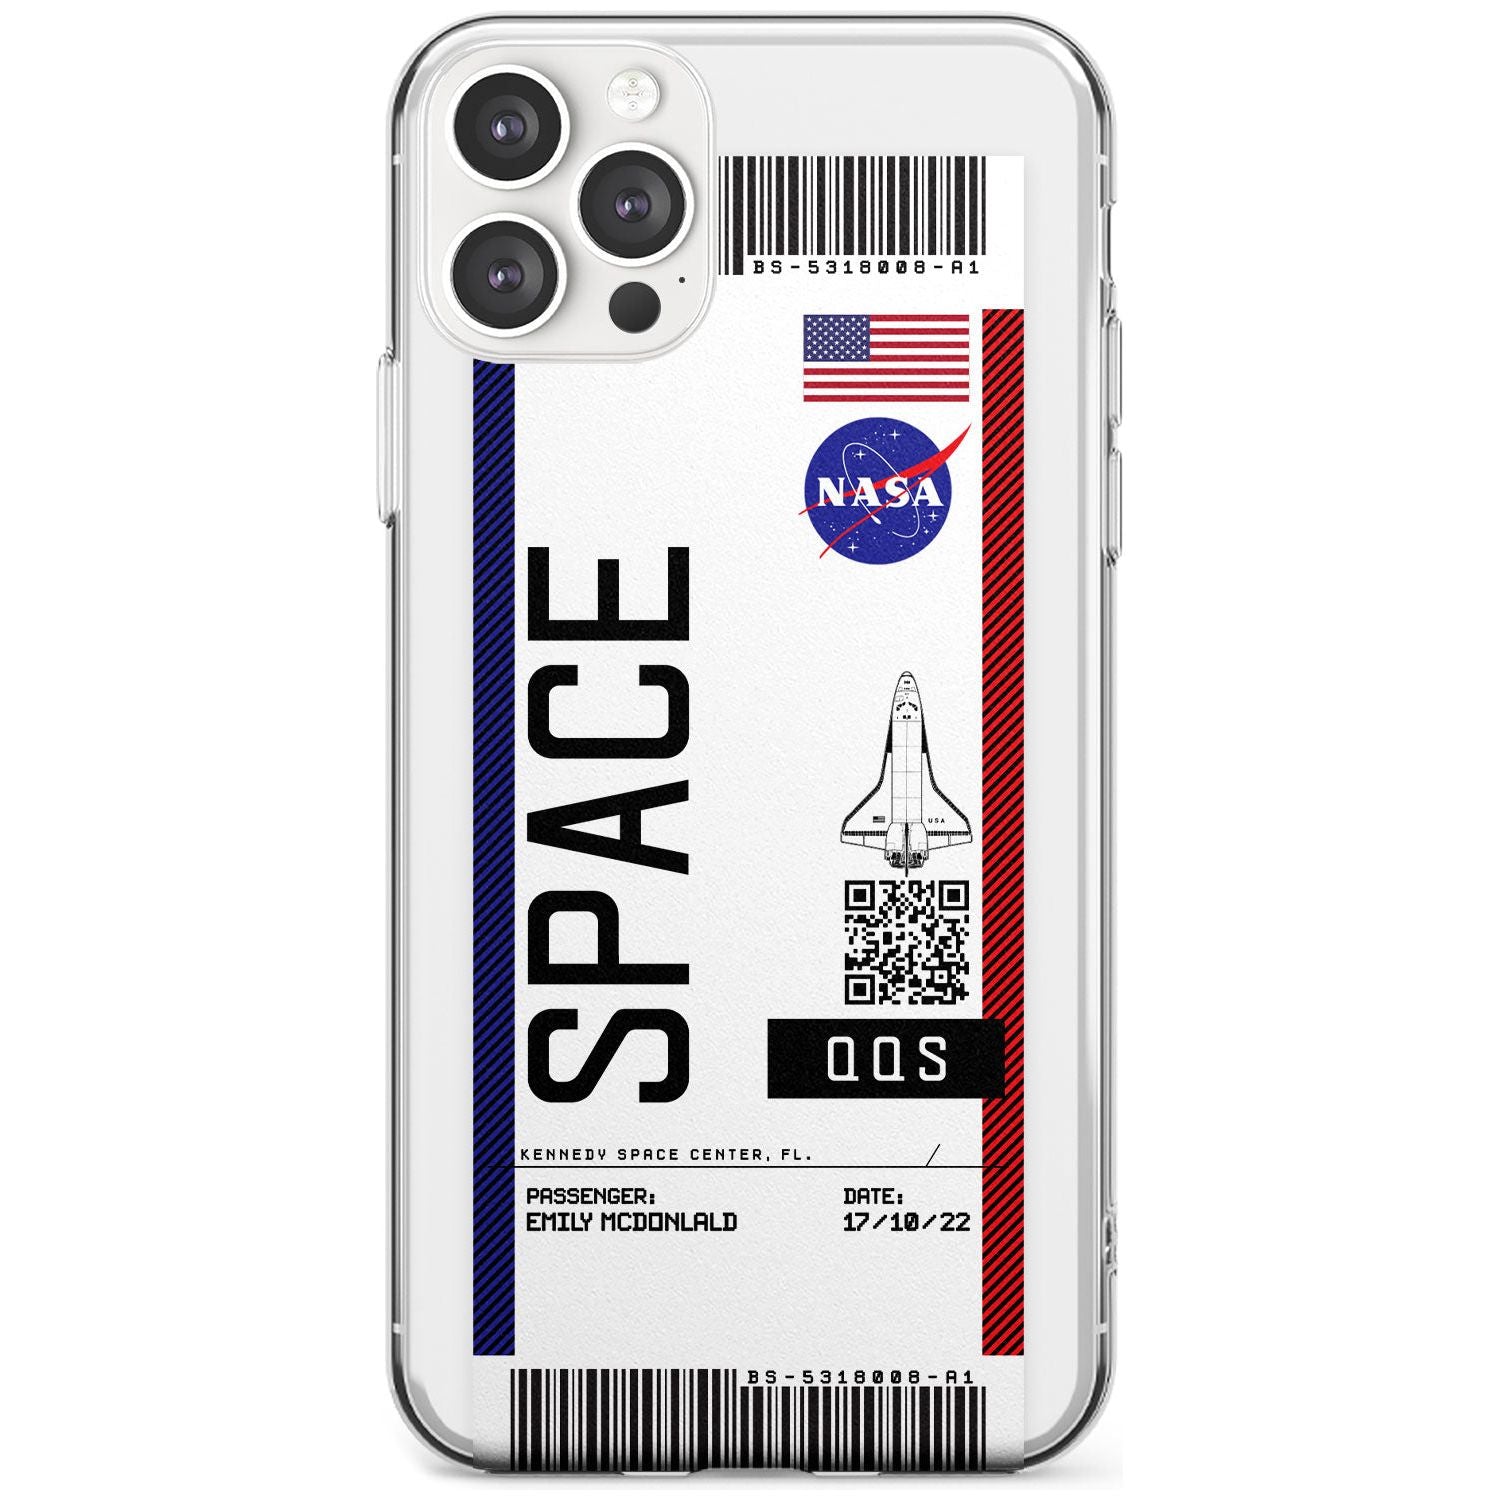 Personalised NASA Boarding Pass (Light) Slim TPU Phone Case for iPhone 11 Pro Max